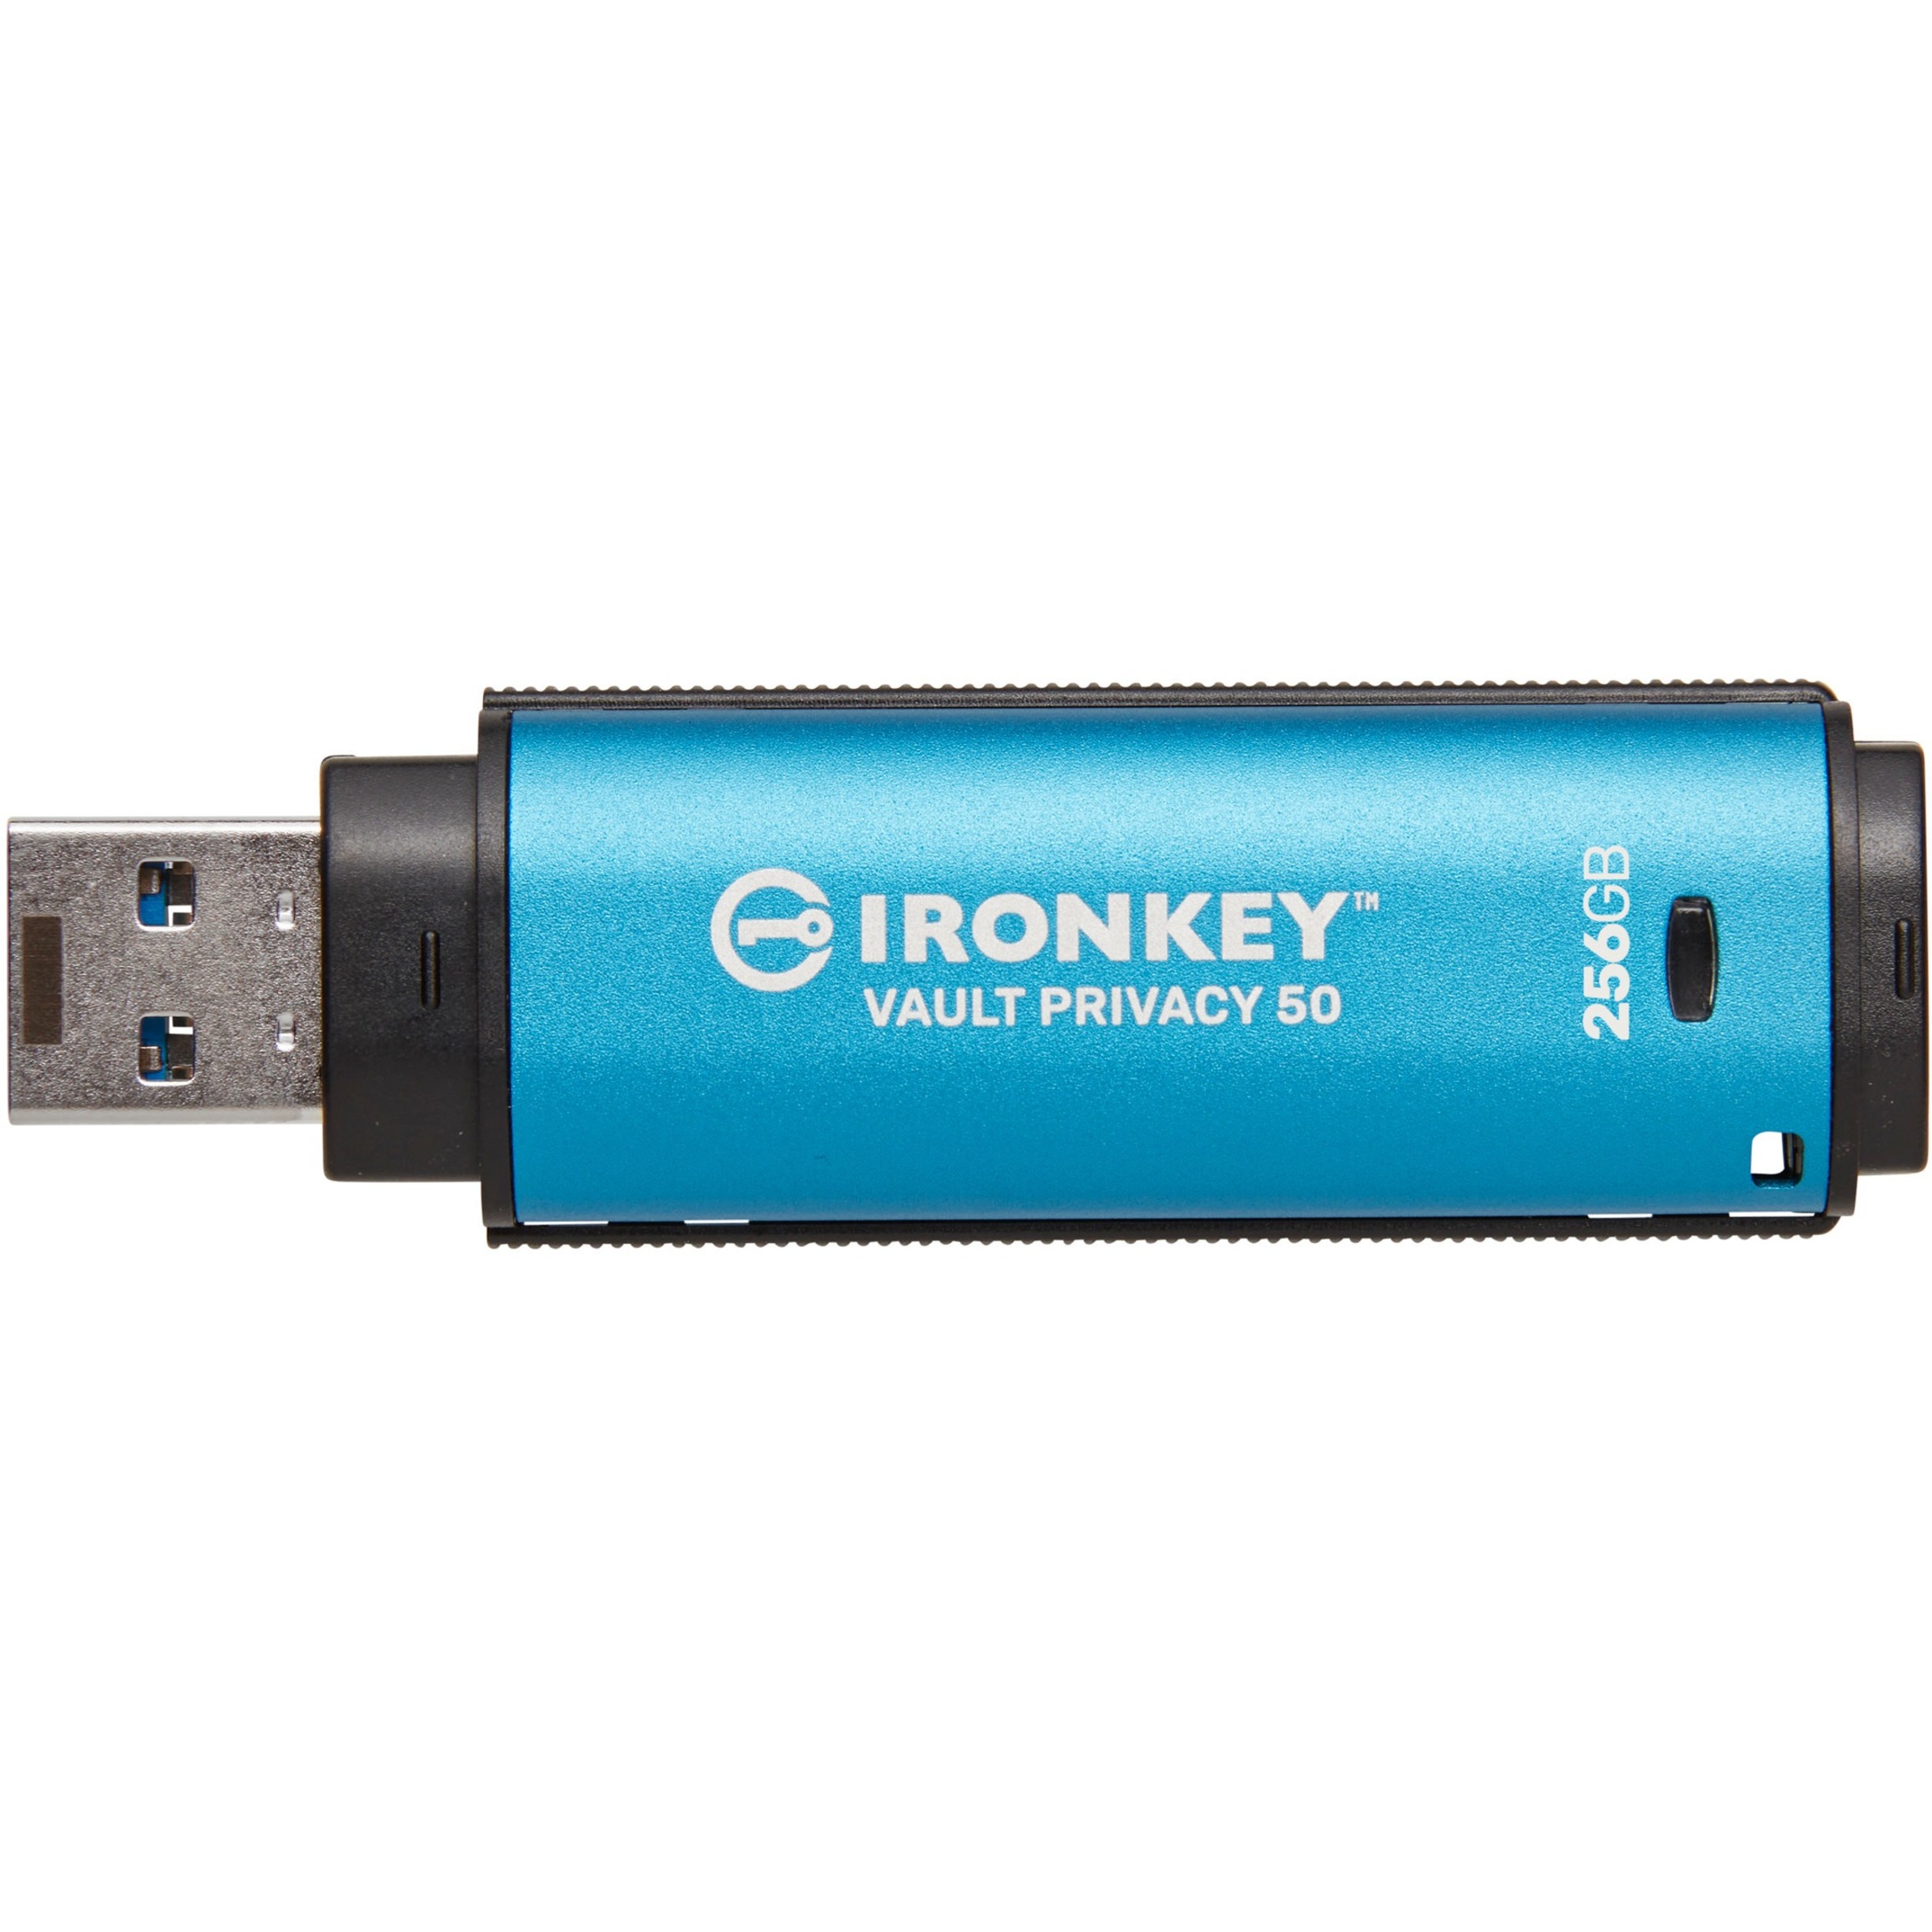 IronKey Vault Privacy 50 Series 256GB USB 3.2 (Gen 1) Type A Flash Drive - image 5 of 9